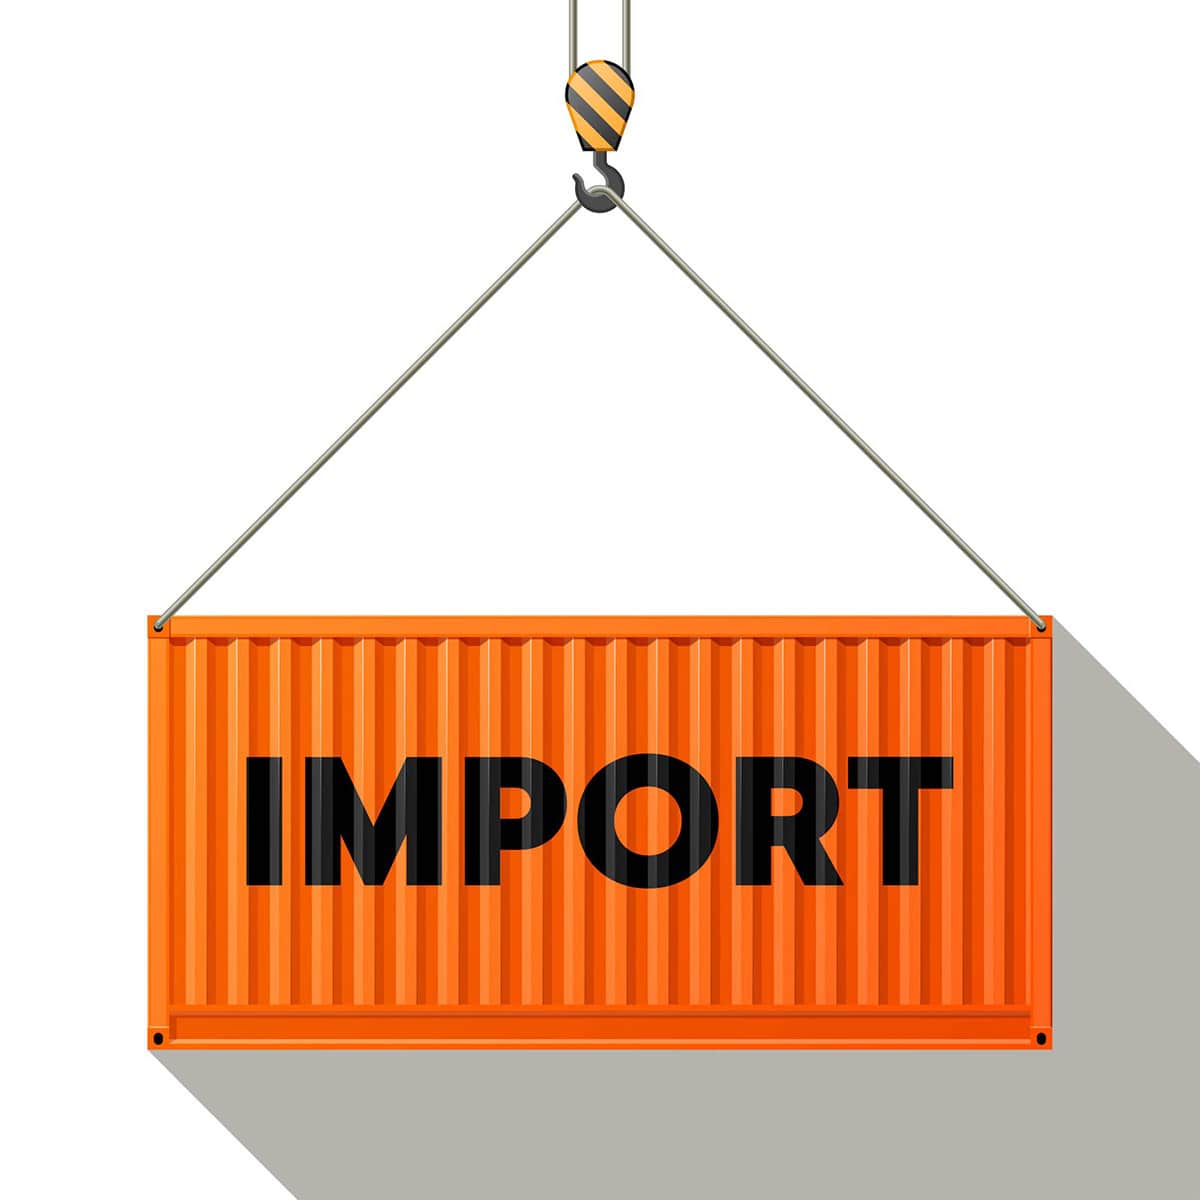 How to Import Goods for Your Company: A Step-by-Step Guide to Importing from China